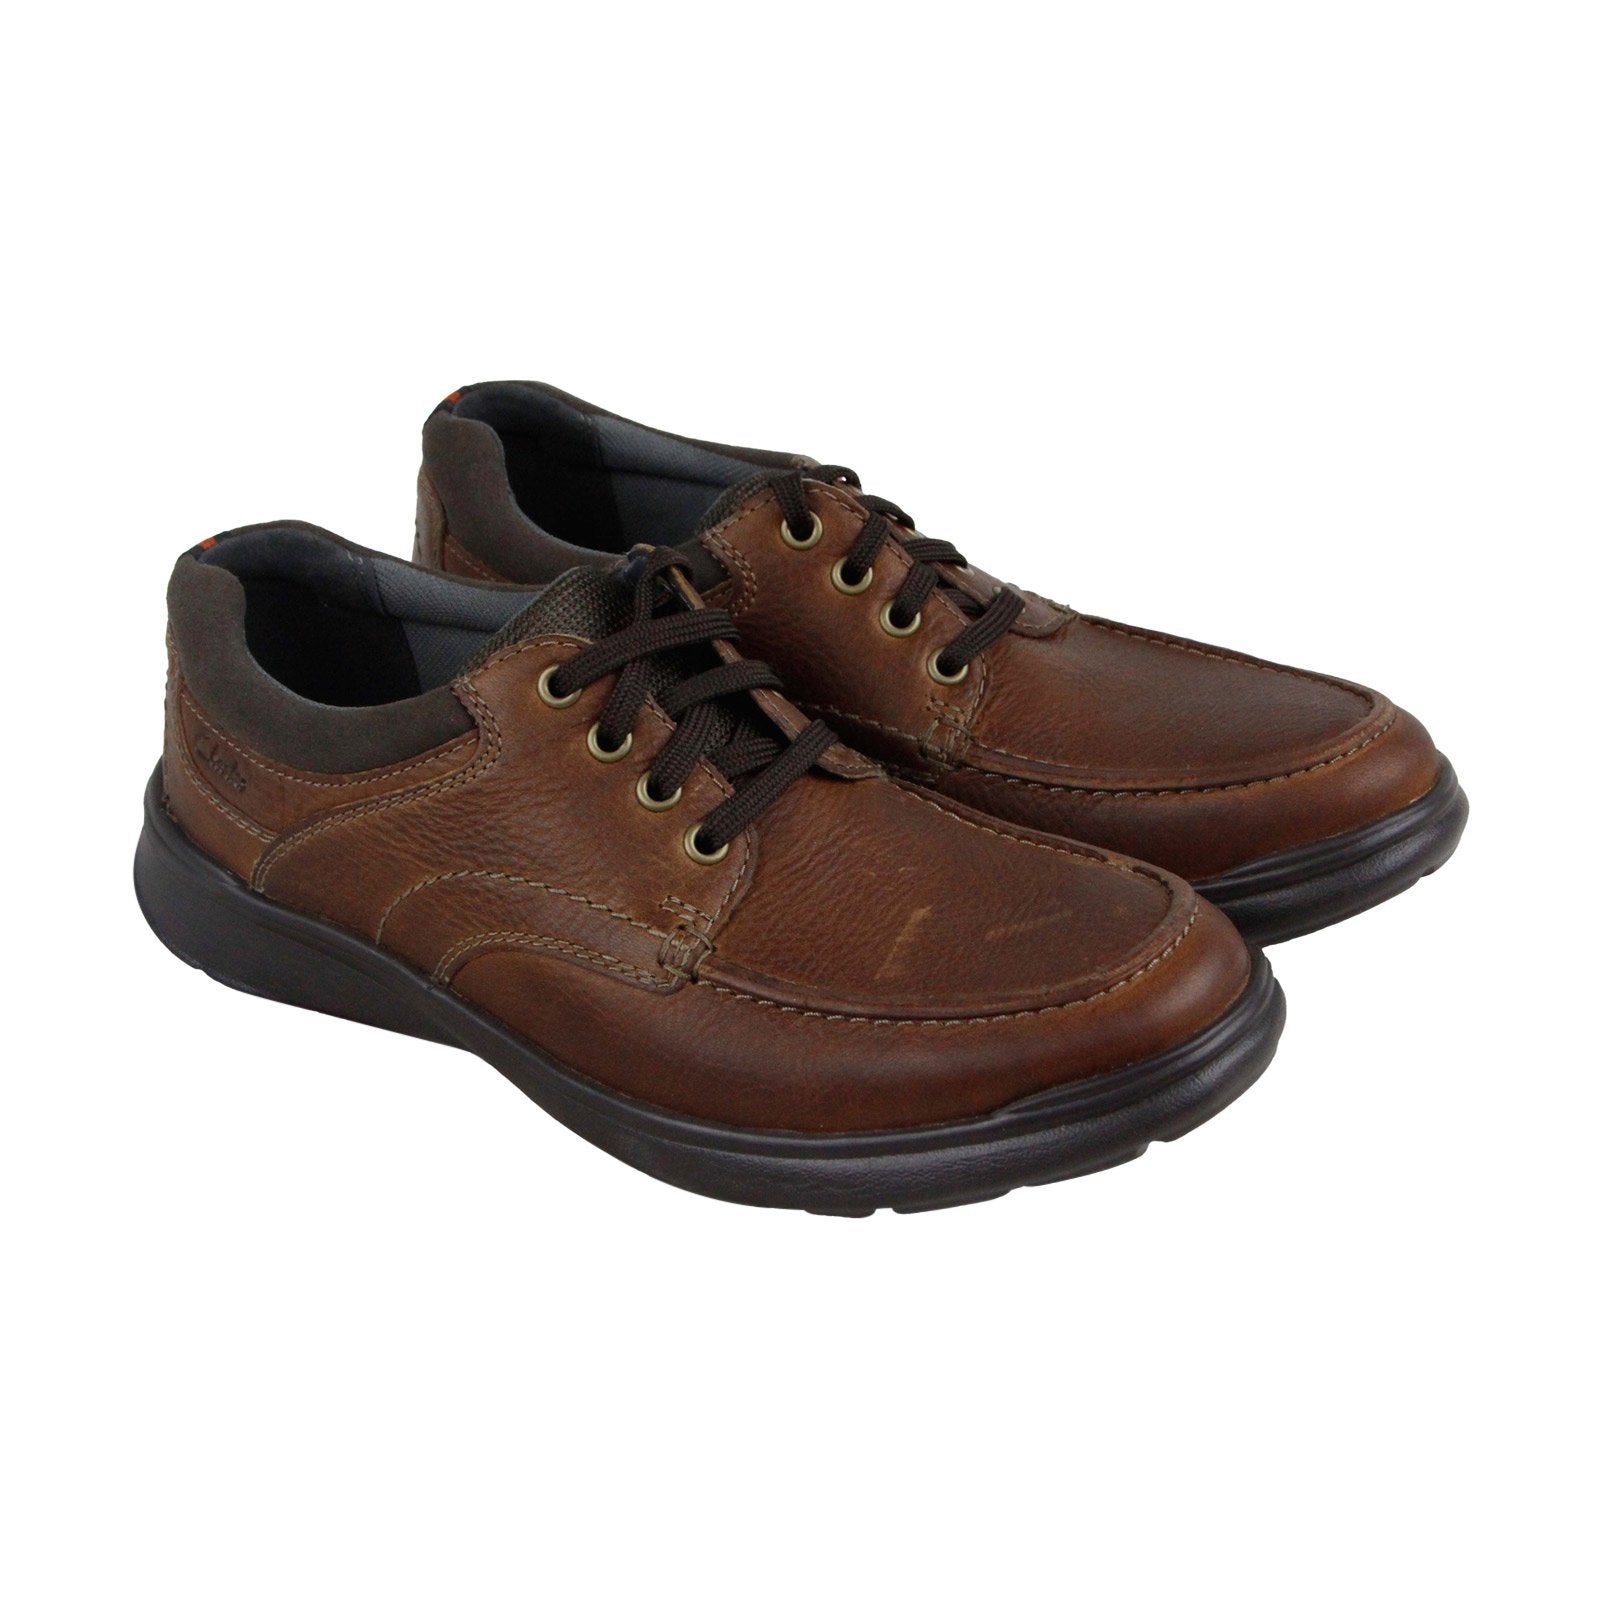 Clarks Cotrell Edge 26119804 Mens Brown Wide 2E Leather Lifestyle Snea ...